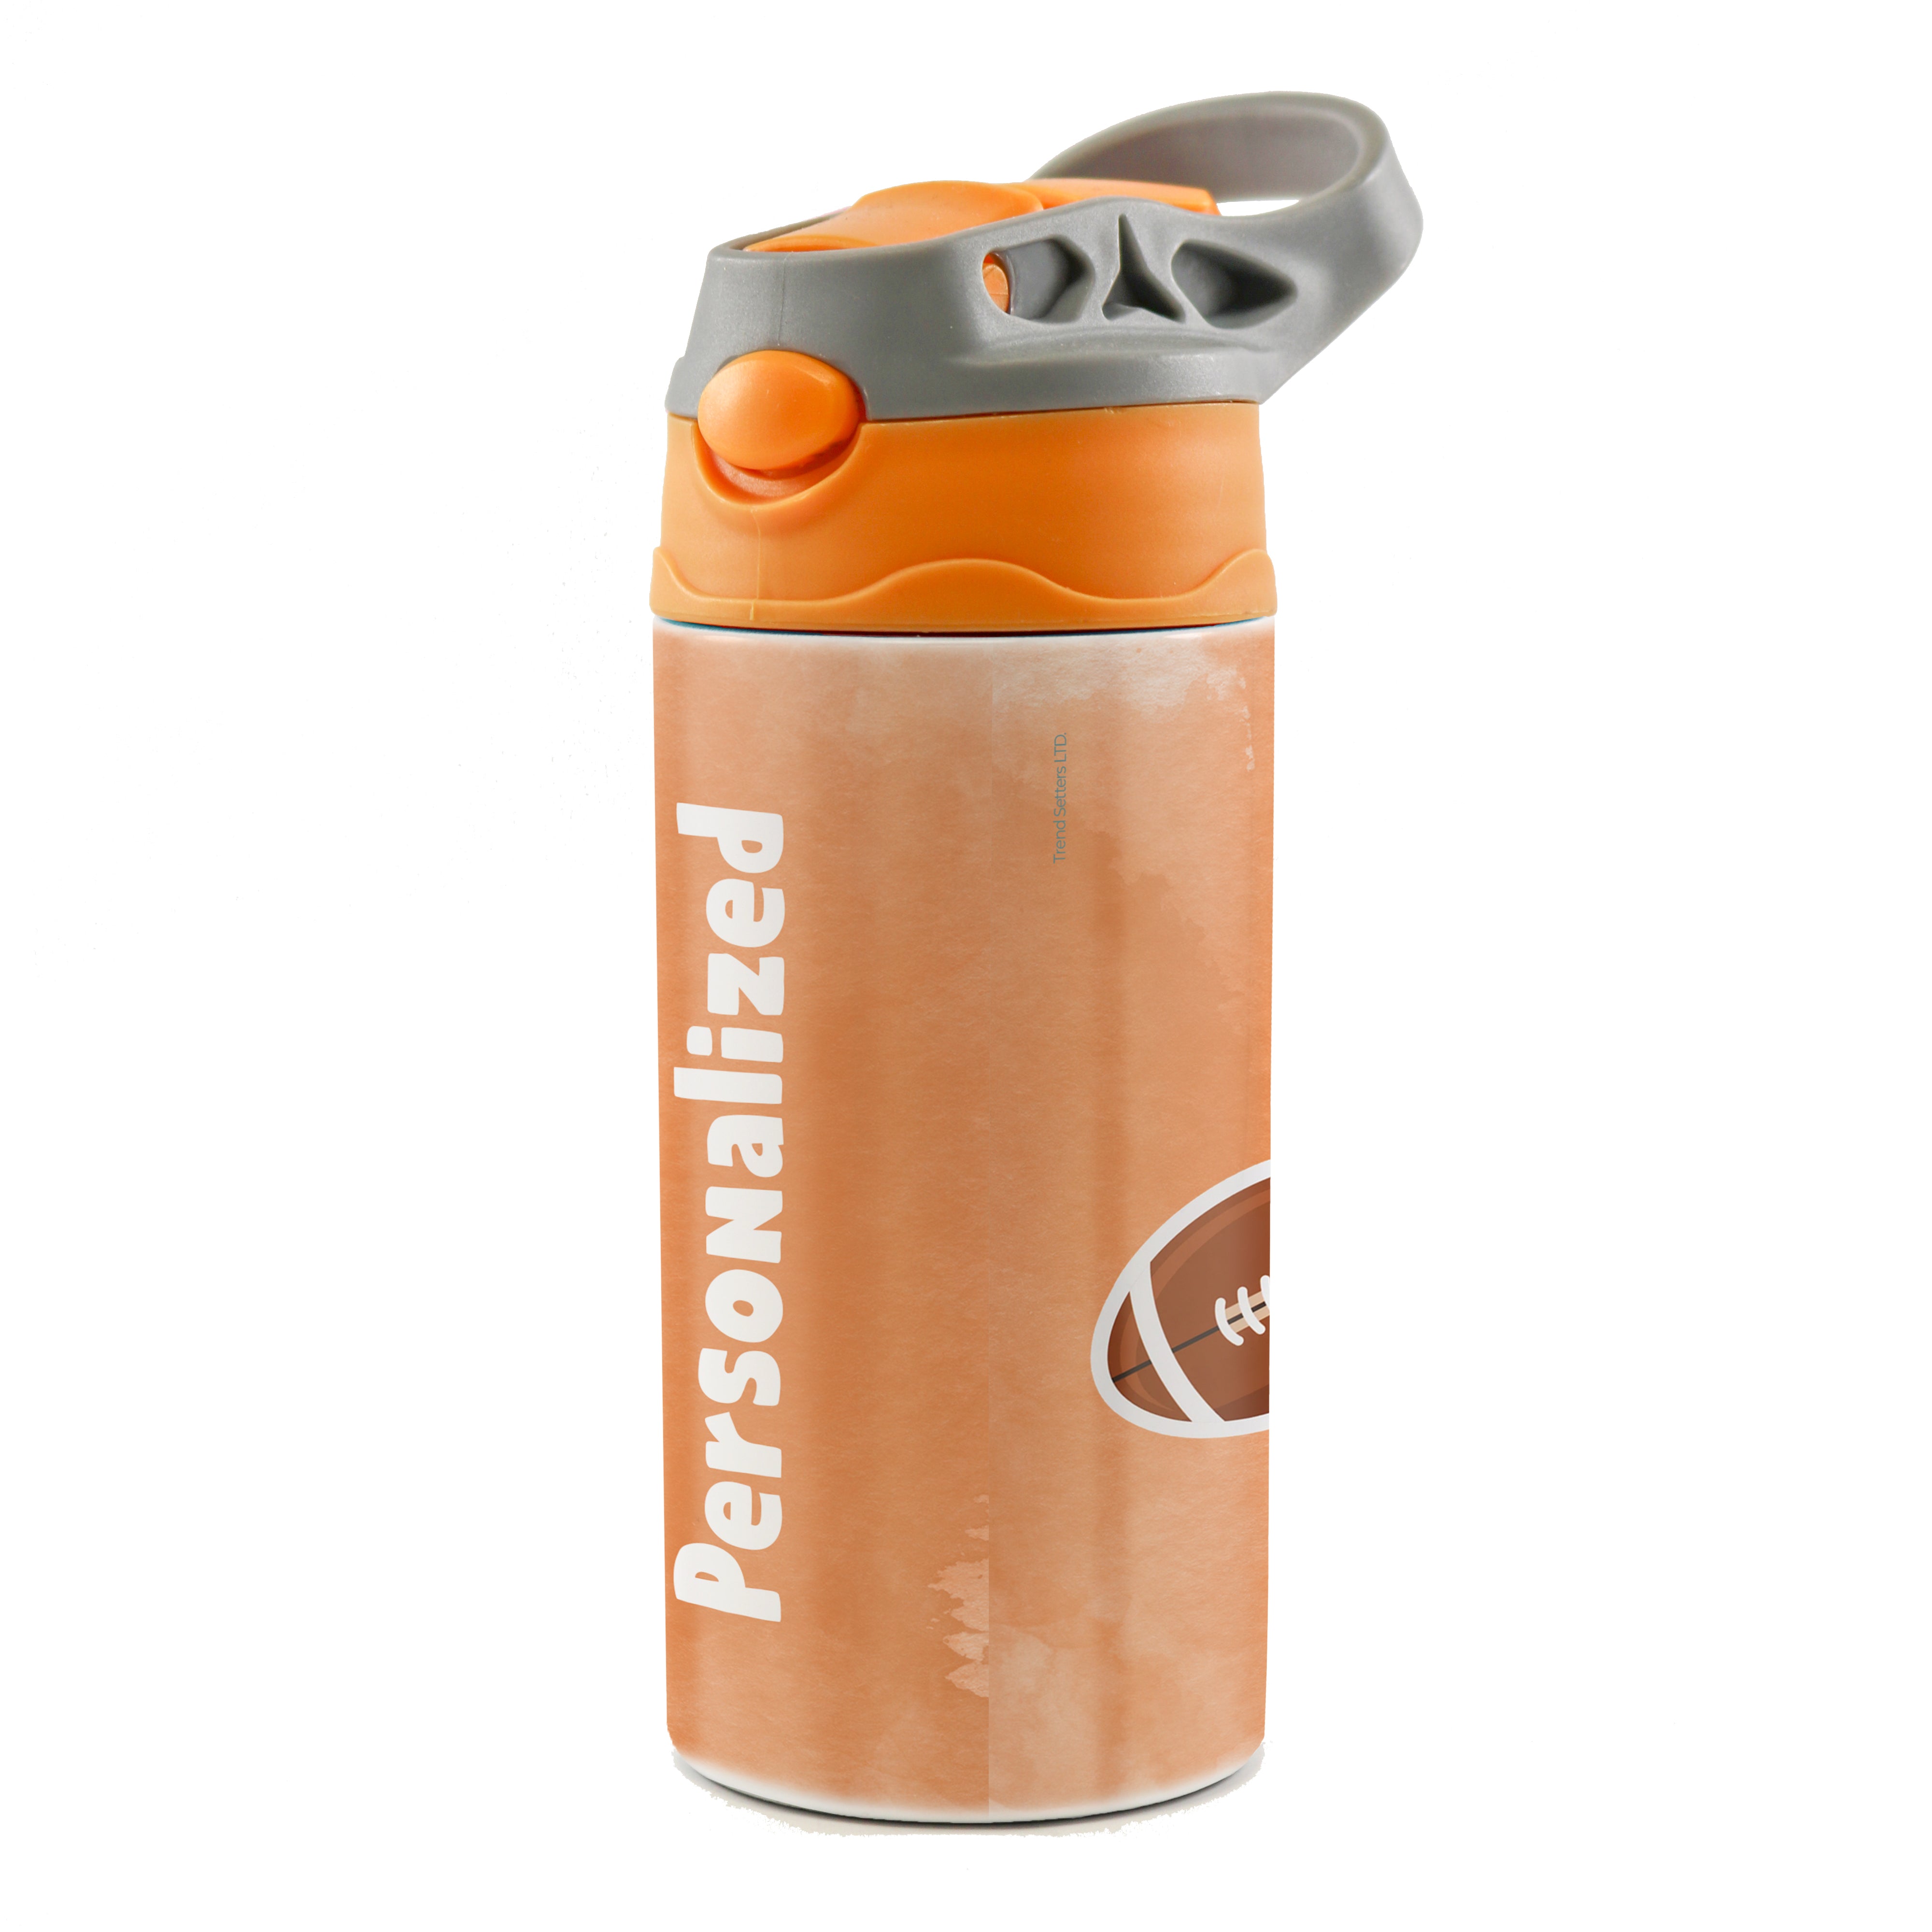 Sports Collection (Stickers - Personalize with Name) 12 oz Stainless Steel Water Bottle with Orange and Grey Lid